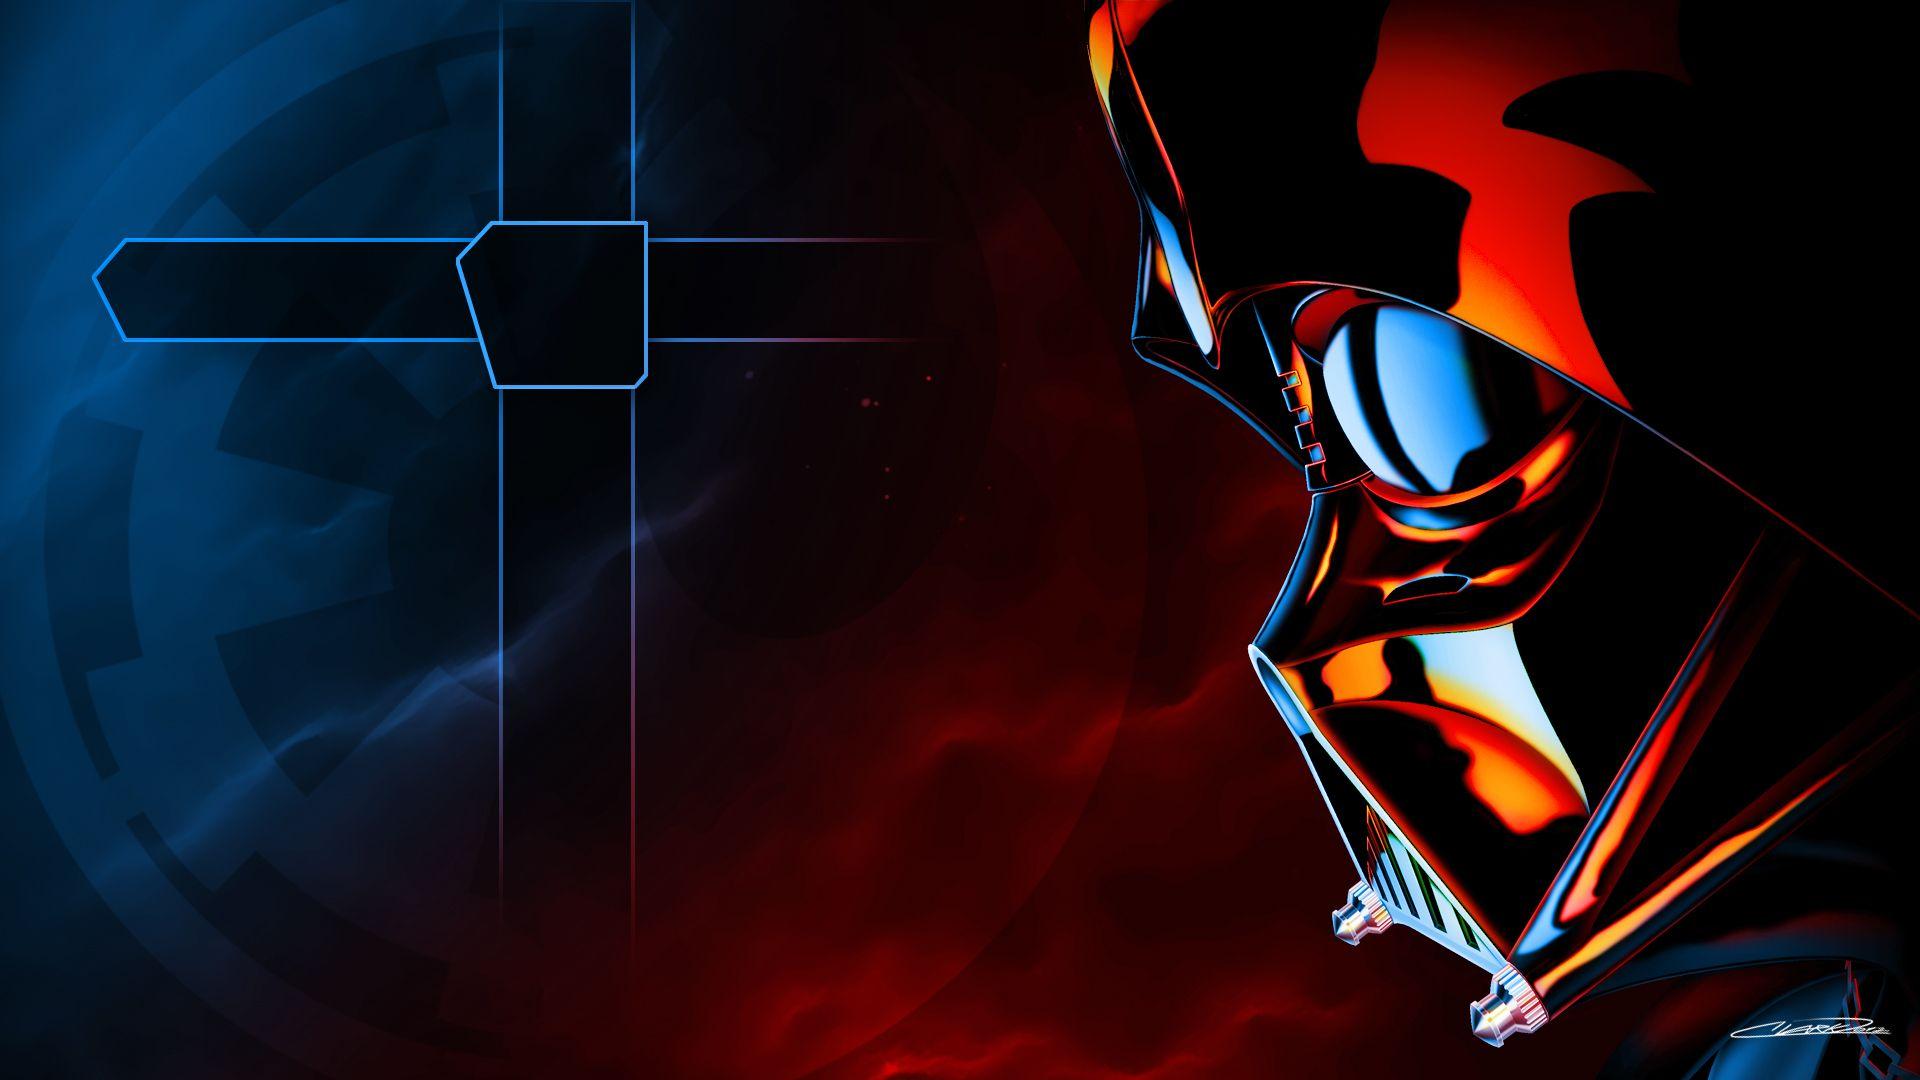 HD wallpaper It Only Does Everything black Sony PS3 console and black  console  Wallpaper Flare